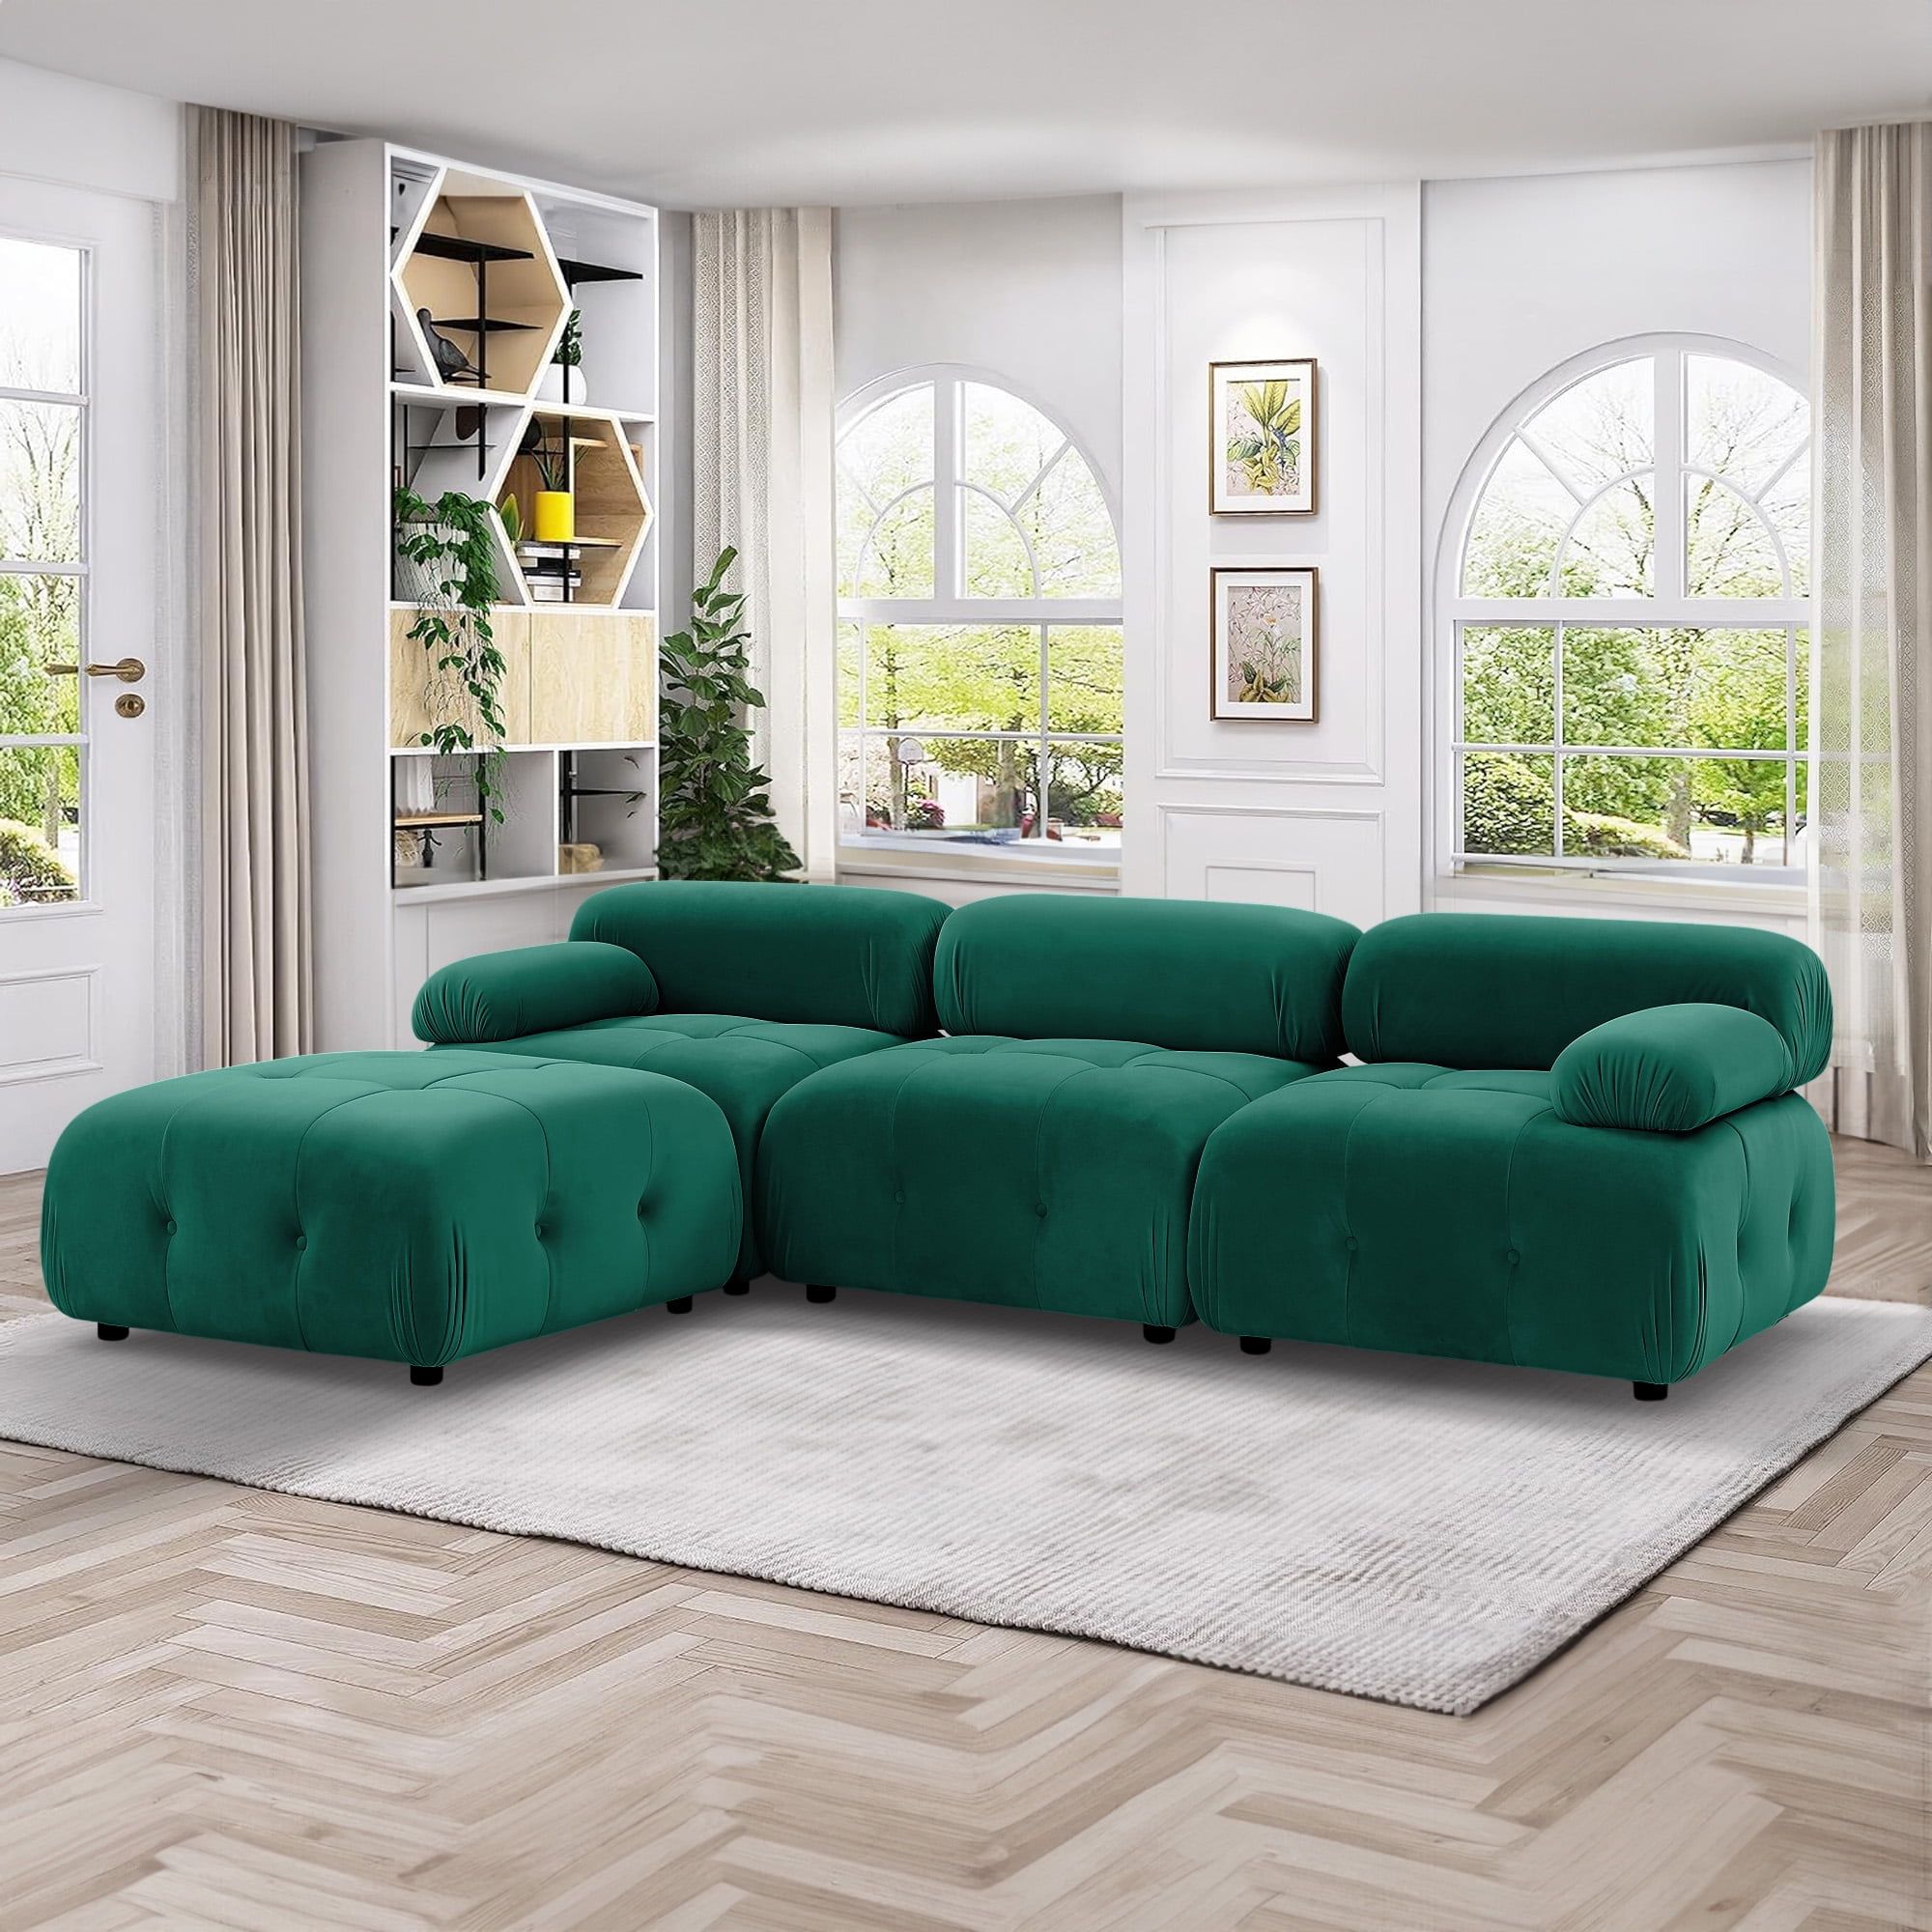 Aukfa 93" Sectional Sofa, Living Room Modular Couch With Ottoman, Pillow  Top Arms, Velvet, Green – Walmart Inside Green Velvet Modular Sectionals (View 4 of 15)